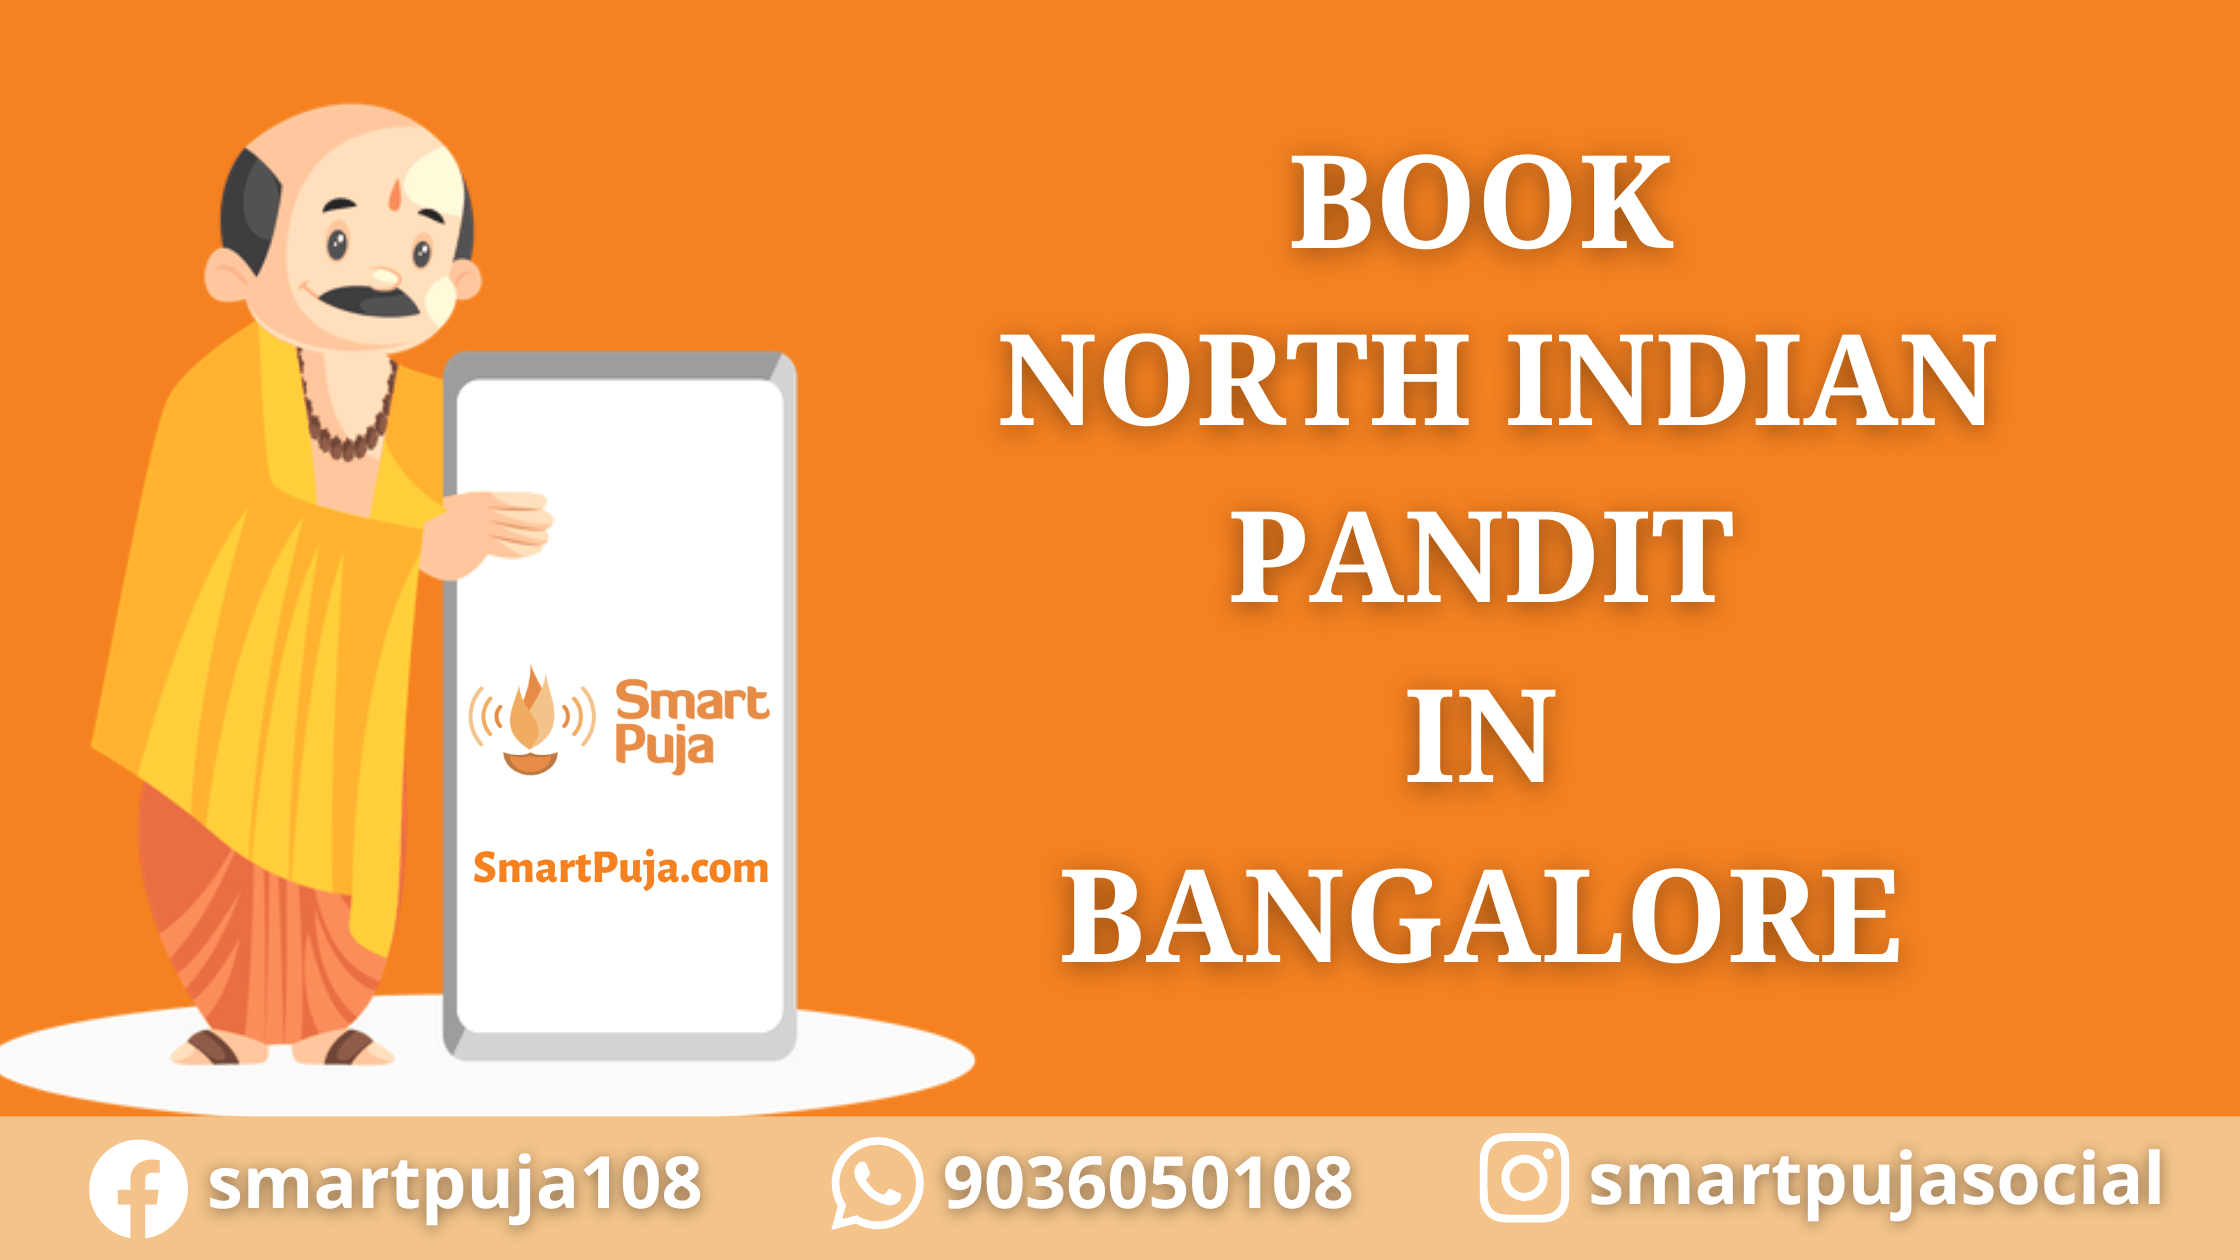 Book North Indian Pandit in Bangalore - Best Puja Service in Bangalore